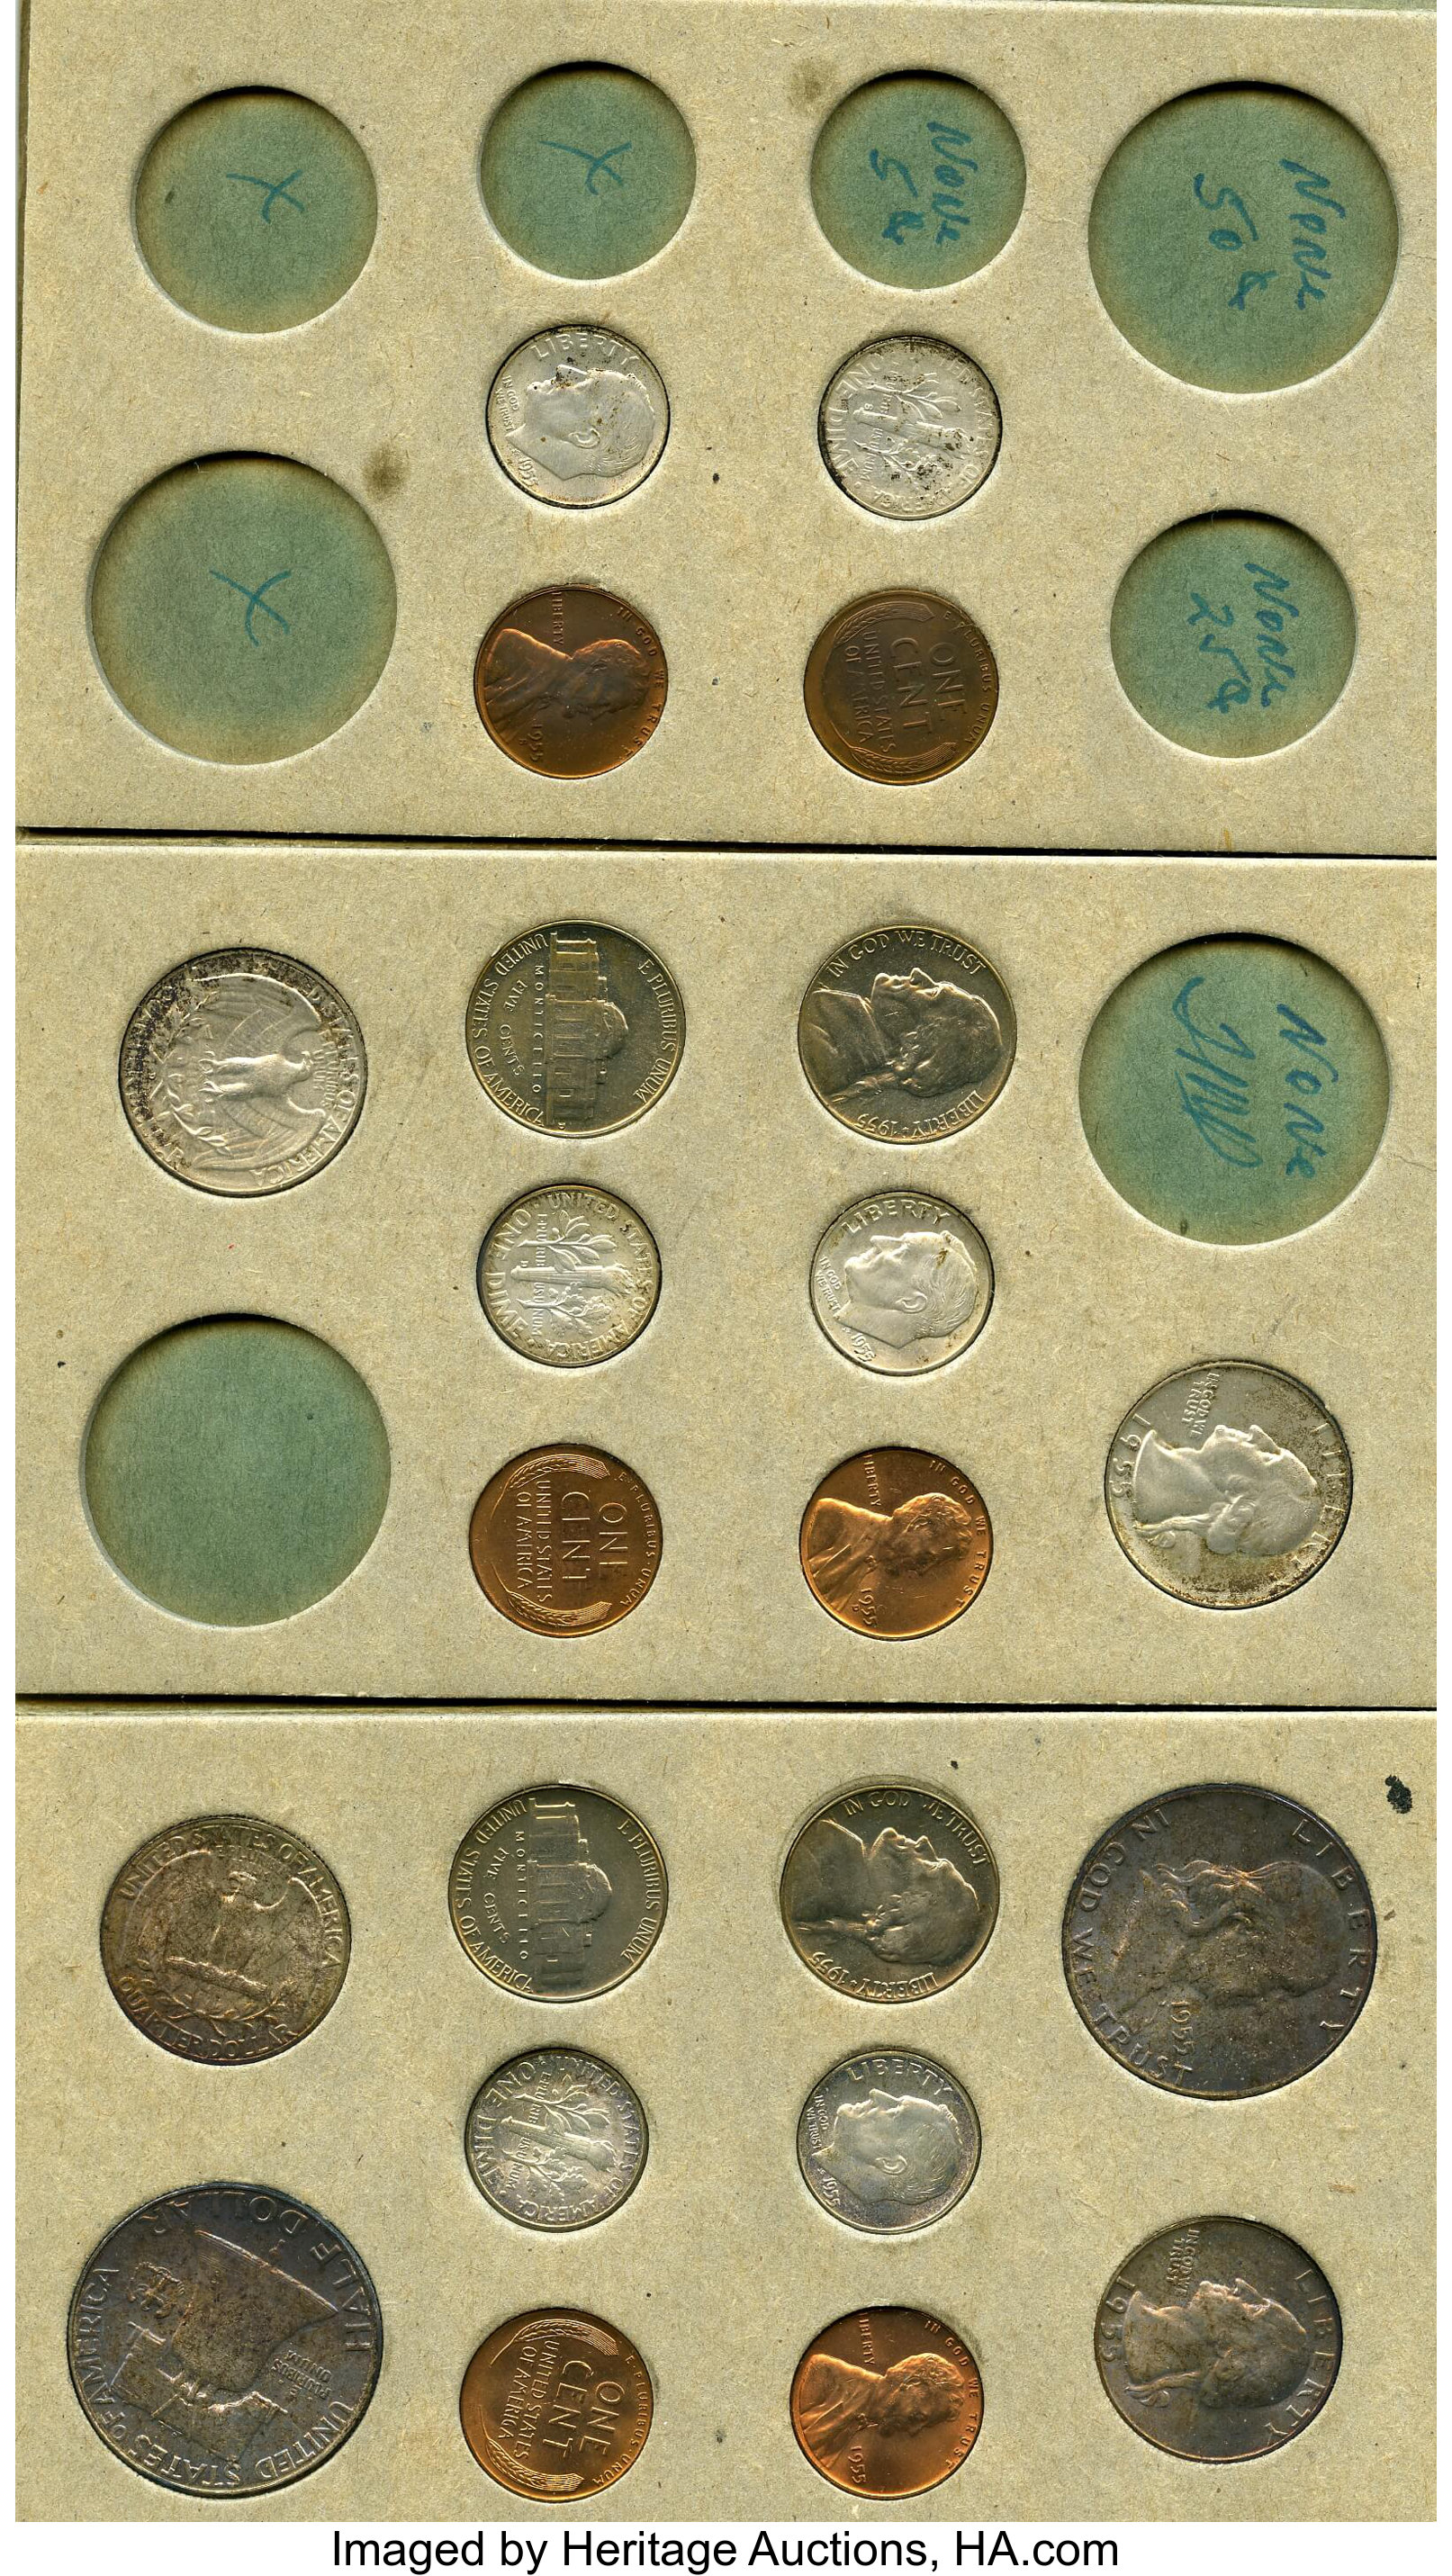 Uncertified 1955 Double Mint Set. The set includes 22 coins, two